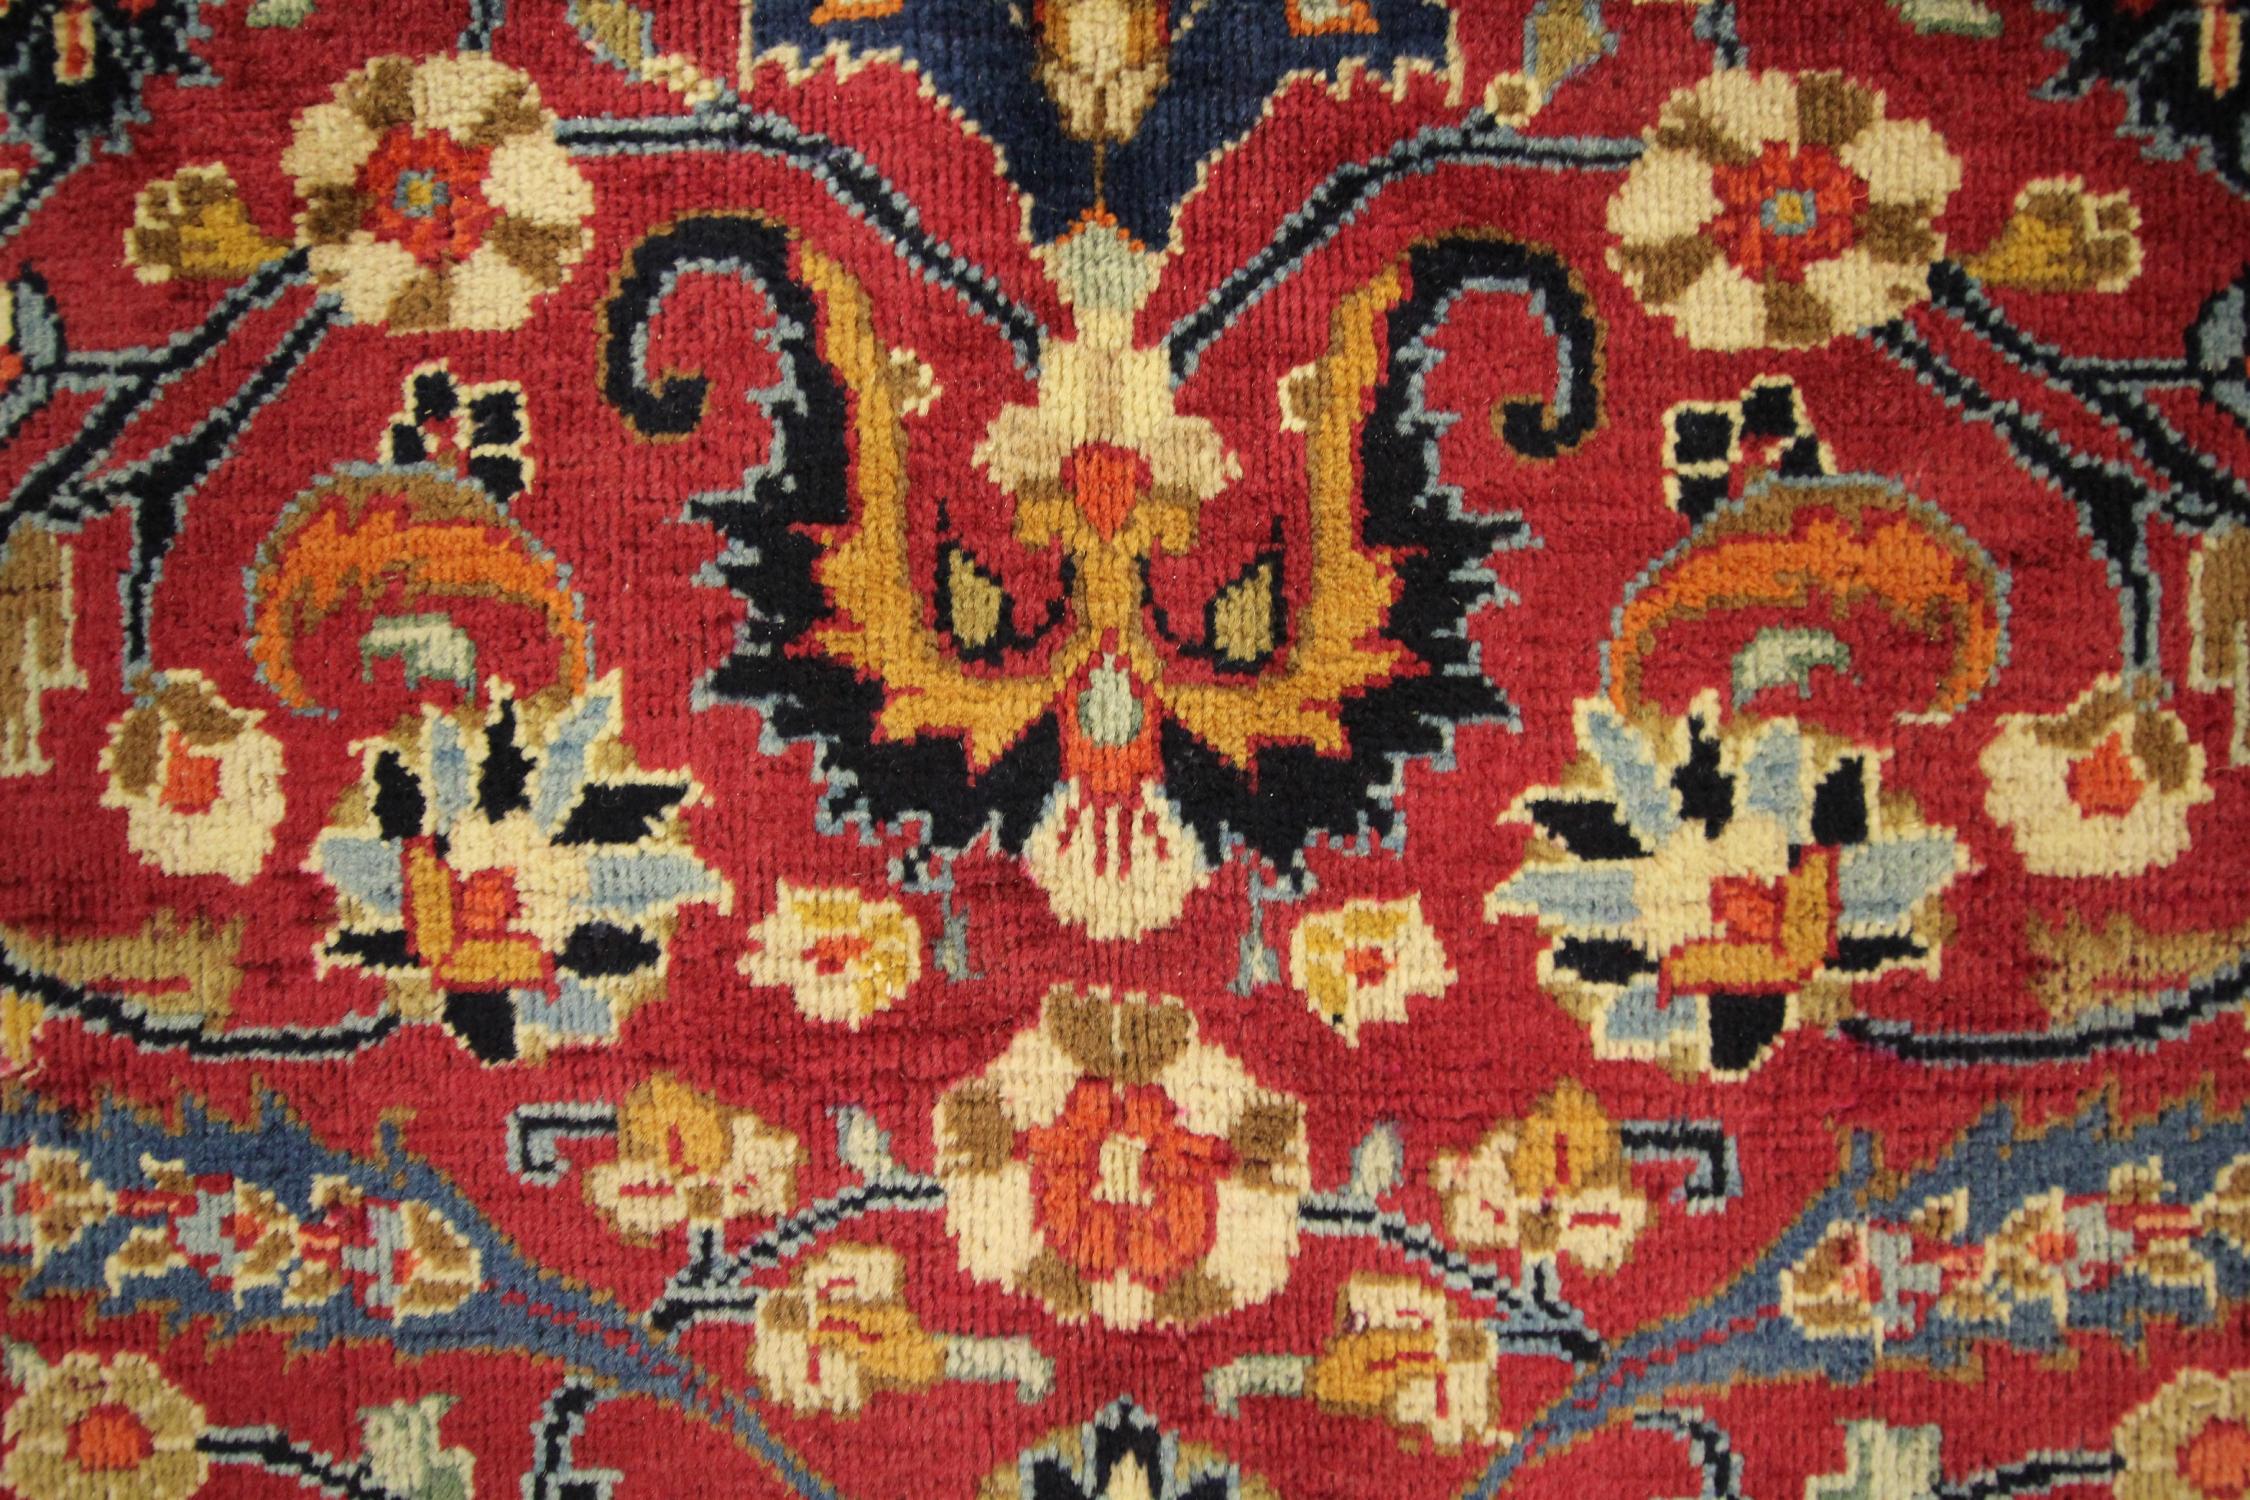 Hand-Knotted Antique Rugs Crimson Red Handmade Carpet, All over Turkish Rugs for Sale For Sale